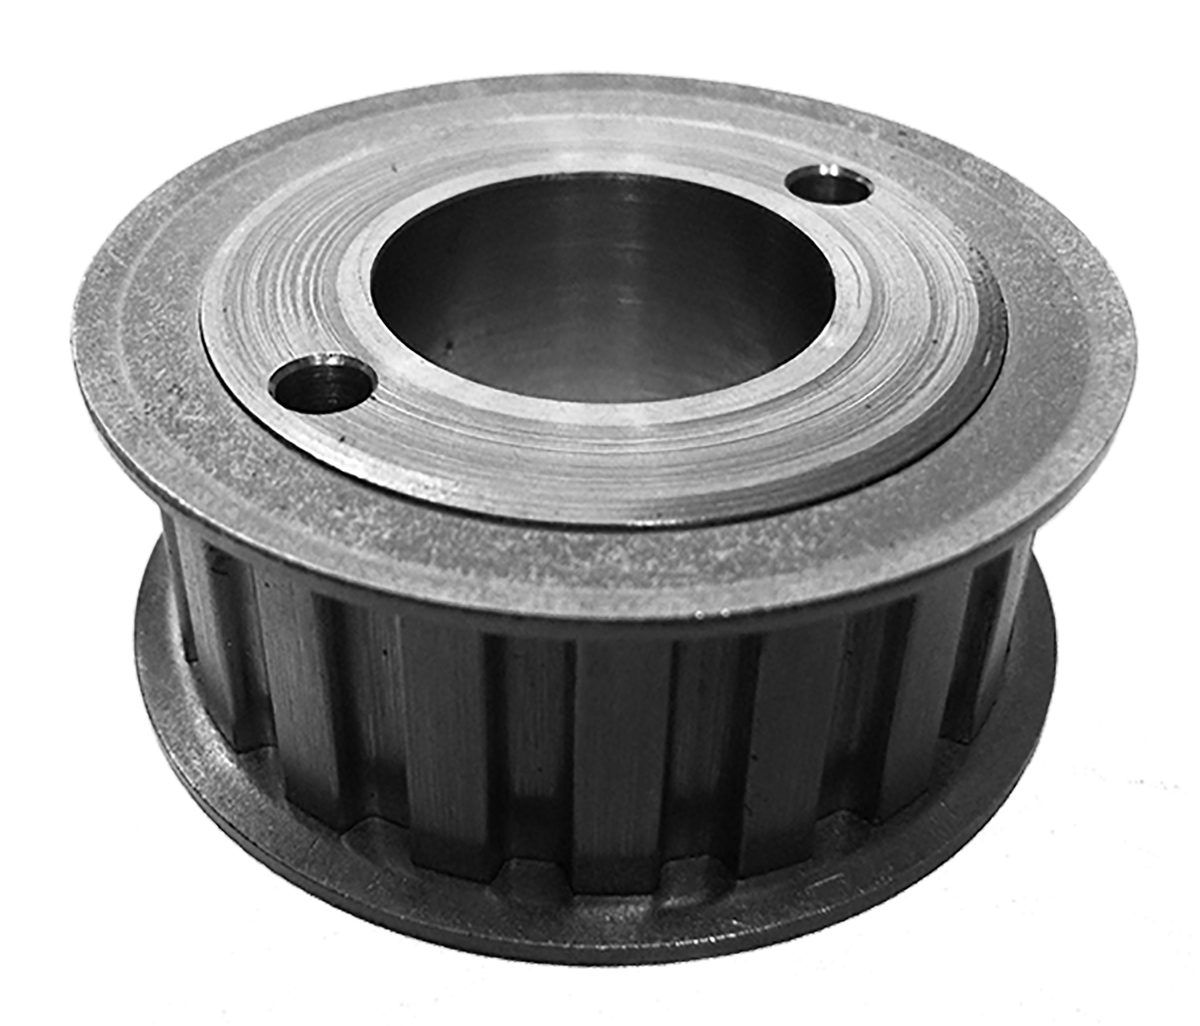 96LP075 - Cast Iron Imperial Pitch Pulleys